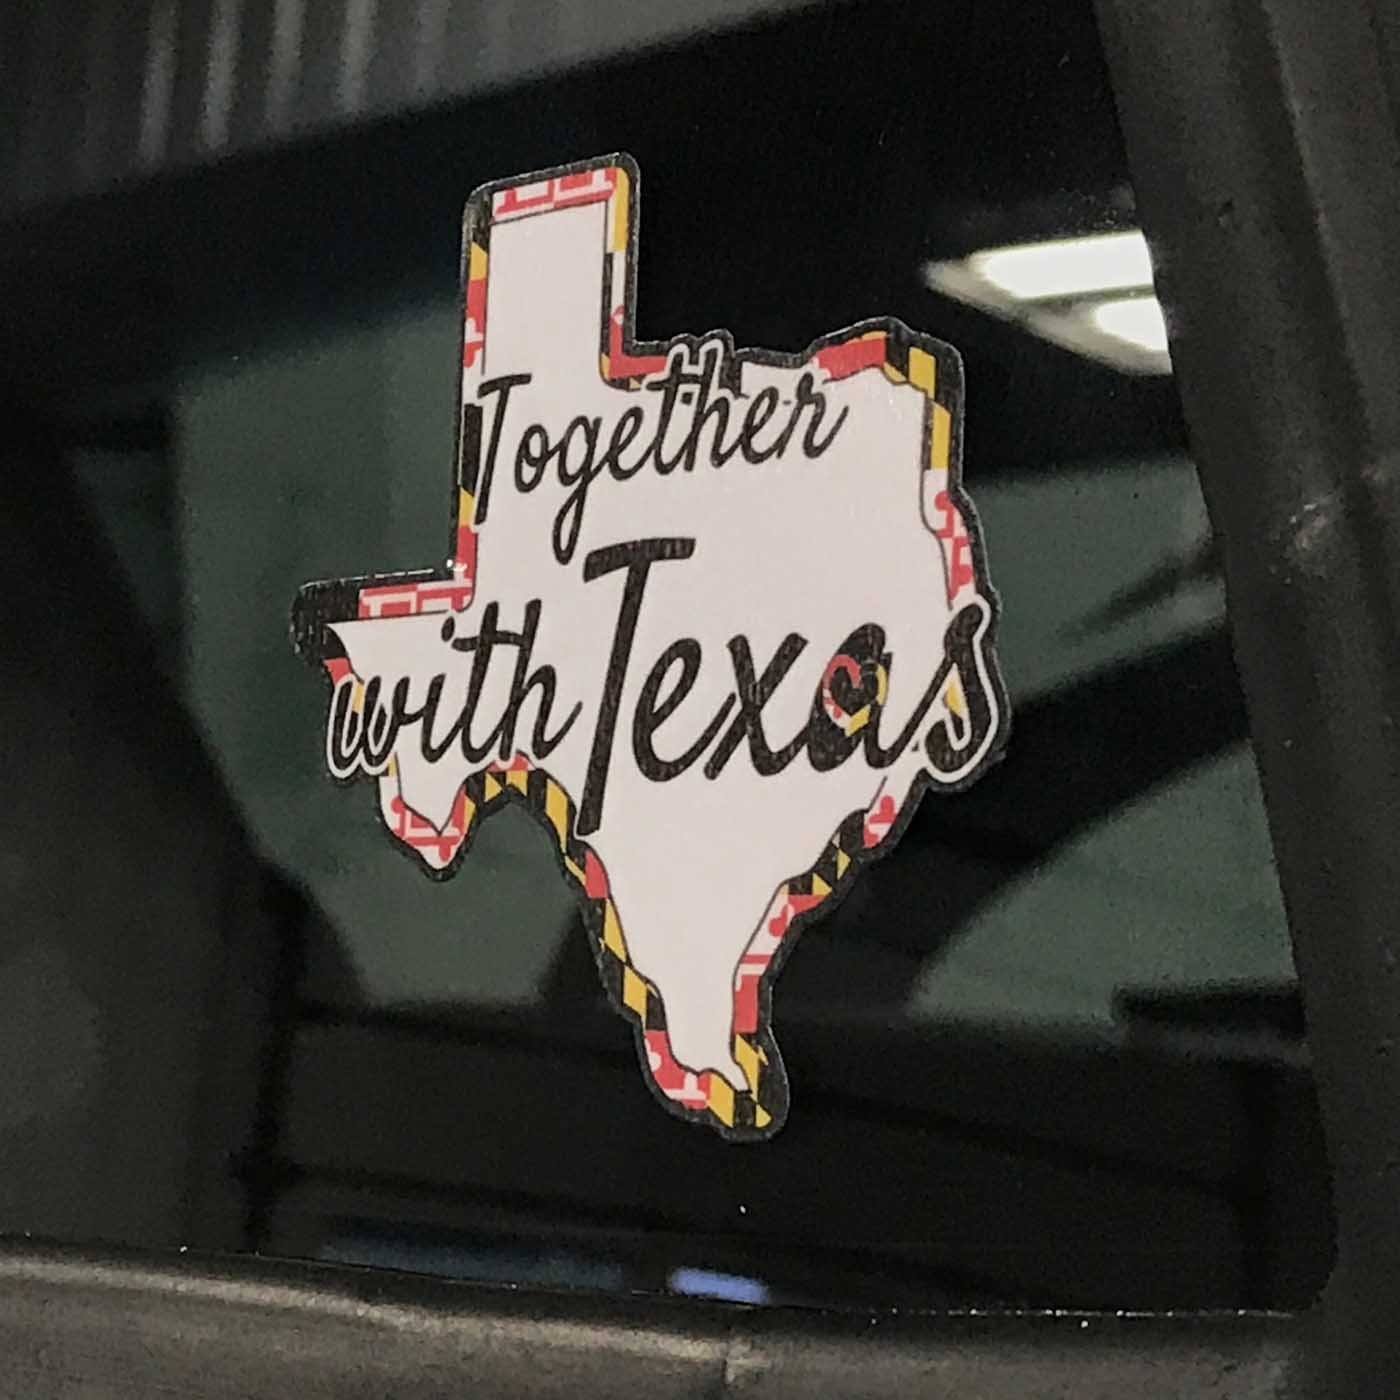 Together with Texas w/ Maryland Flag / Sticker - Route One Apparel